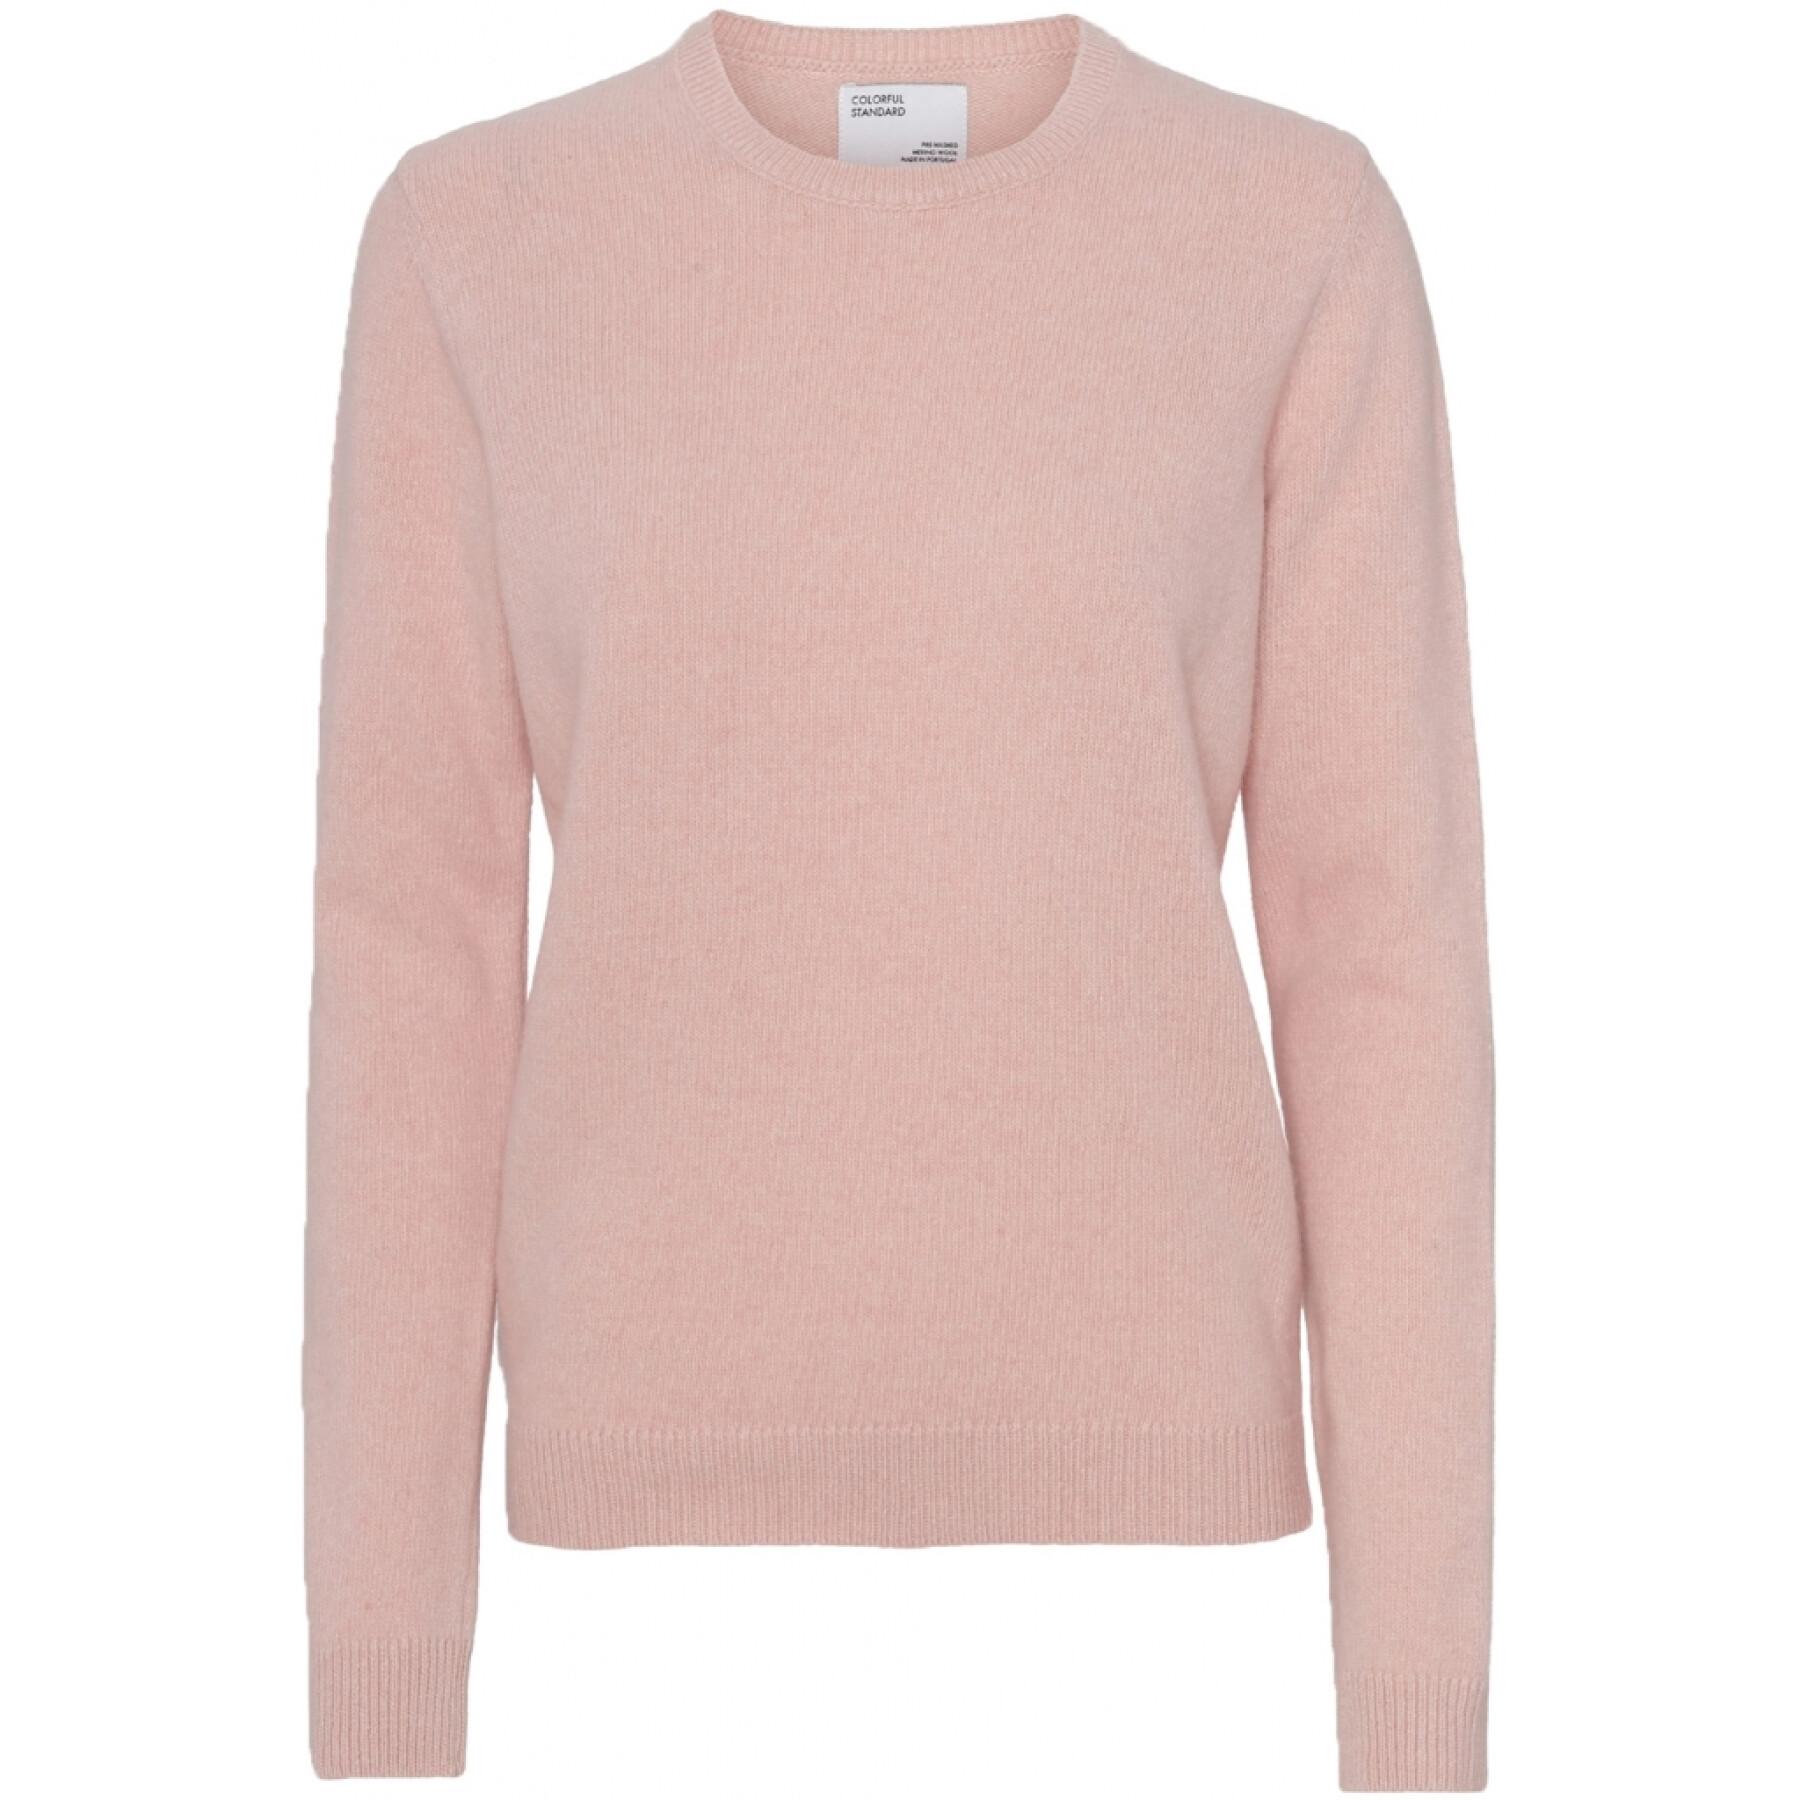 Pullover mit Rundhalsausschnitt aus Wolle, Frau Colorful Standard Classic Merino faded pink